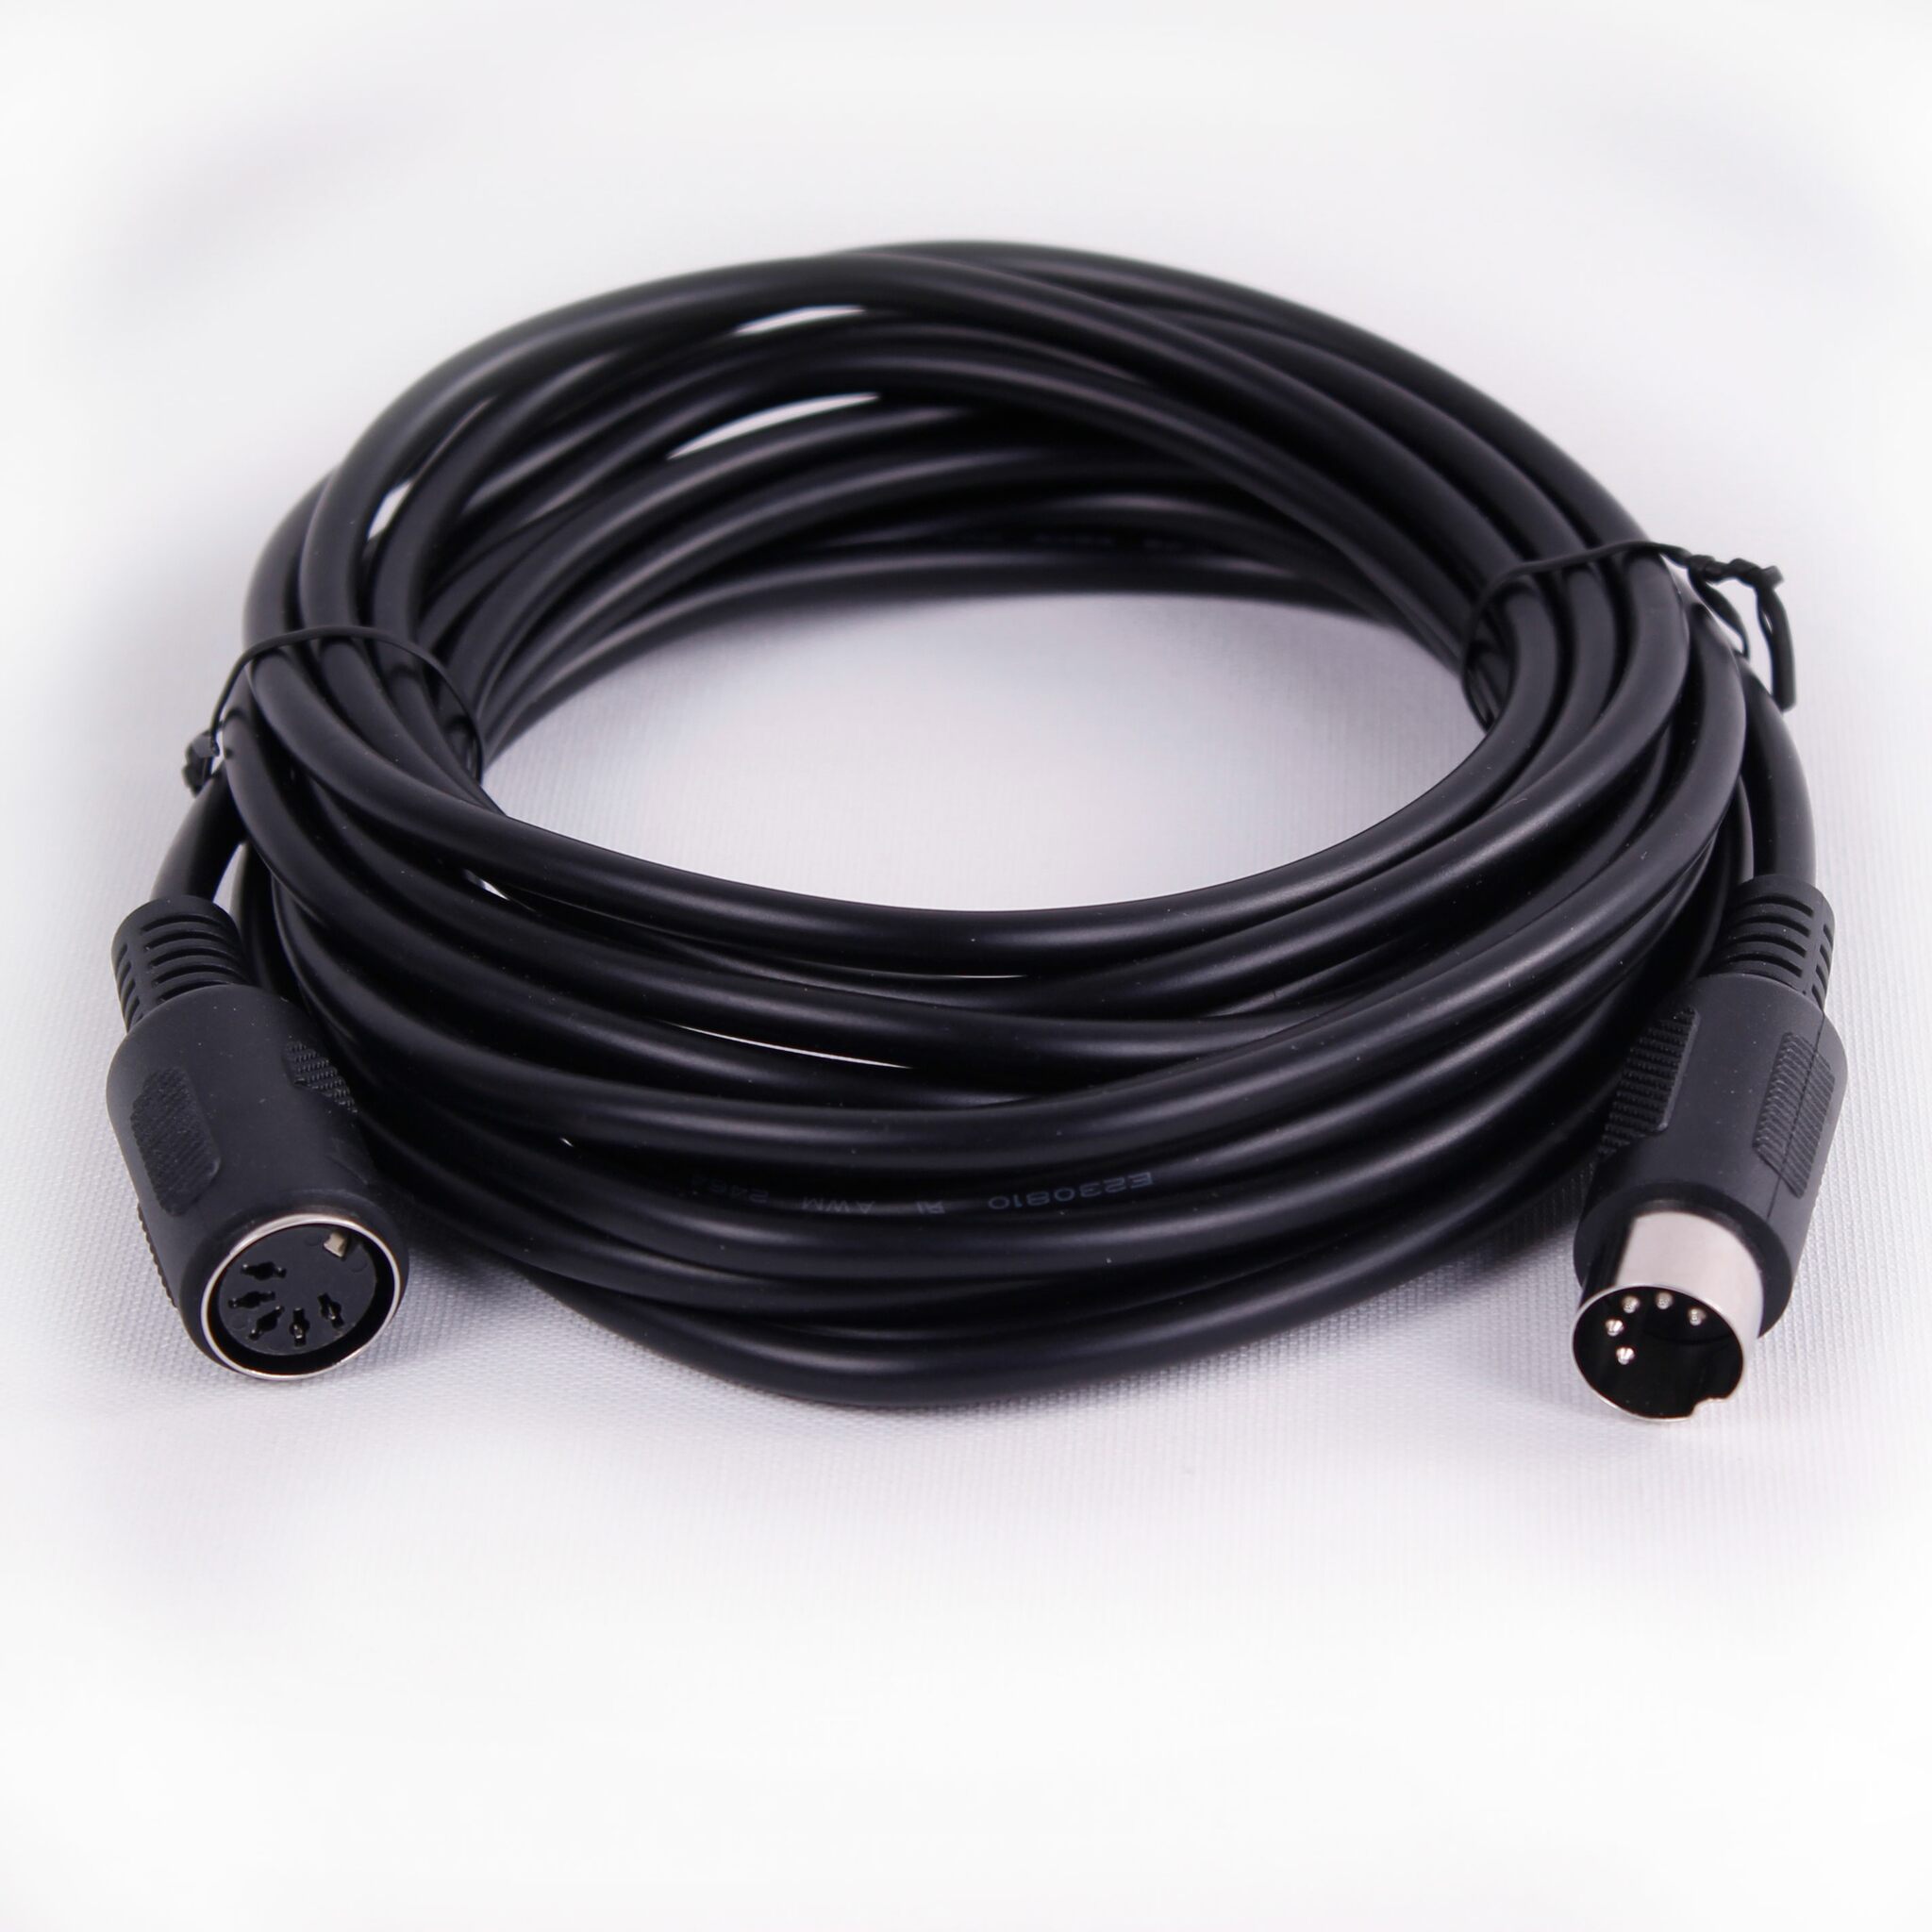 Extension cable 5 m for Clipper depth sounder